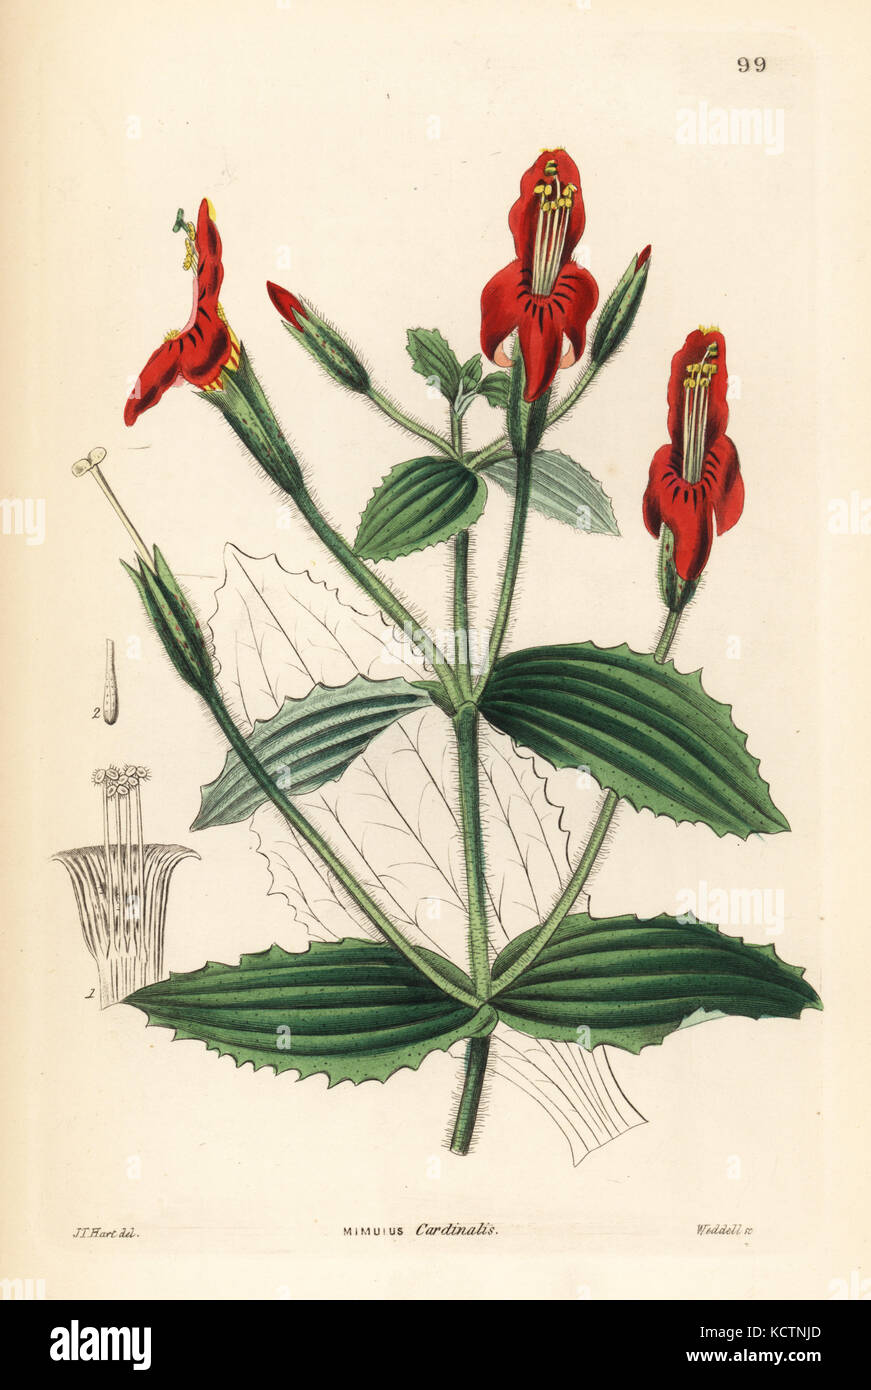 Scarlet monkey flower, Mimulus cardinalis. Handcoloured copperplate engraving by Weddell after J.T. Hart from John Lindley and Robert Sweet's Ornamental Flower Garden and Shrubbery, G. Willis, London, 1854. Stock Photo